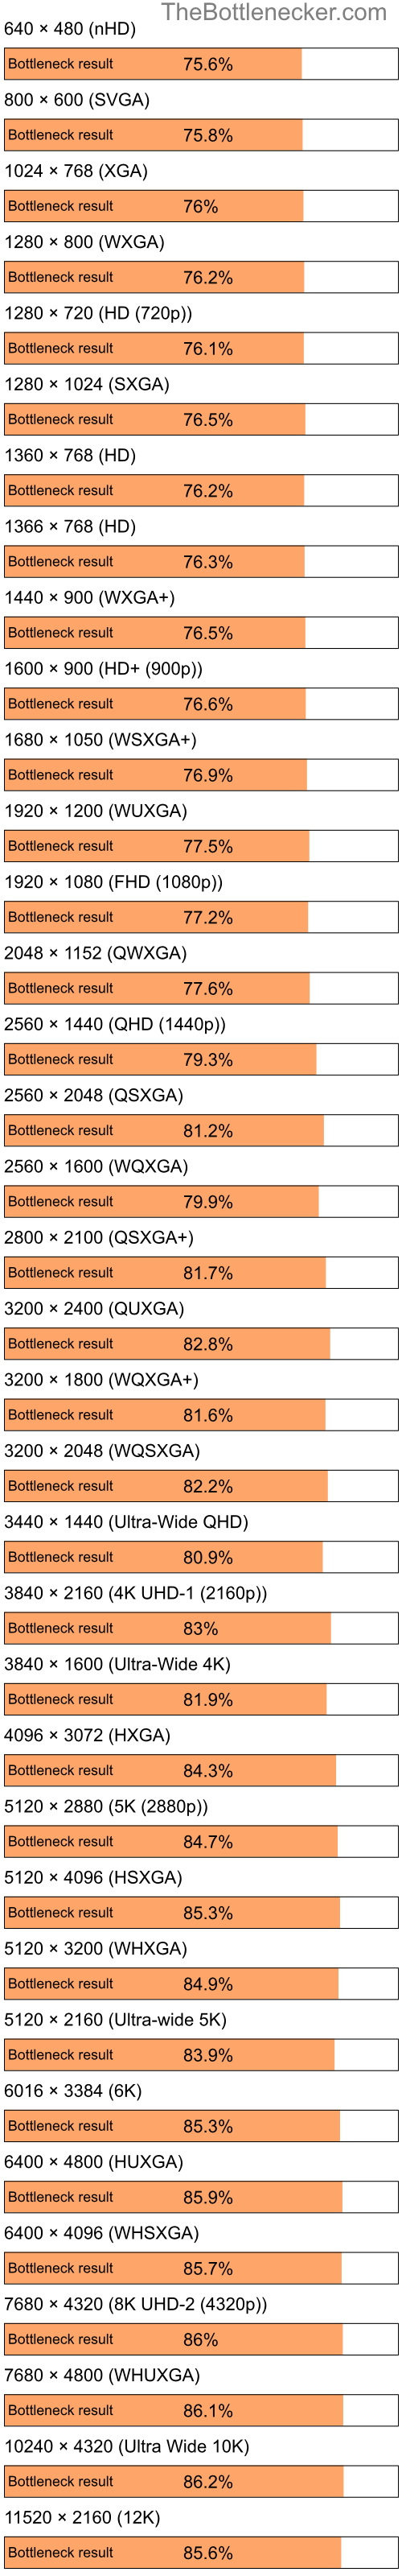 Bottleneck results by resolution for Intel Atom Z520 and AMD Radeon 2100 in Graphic Card Intense Tasks